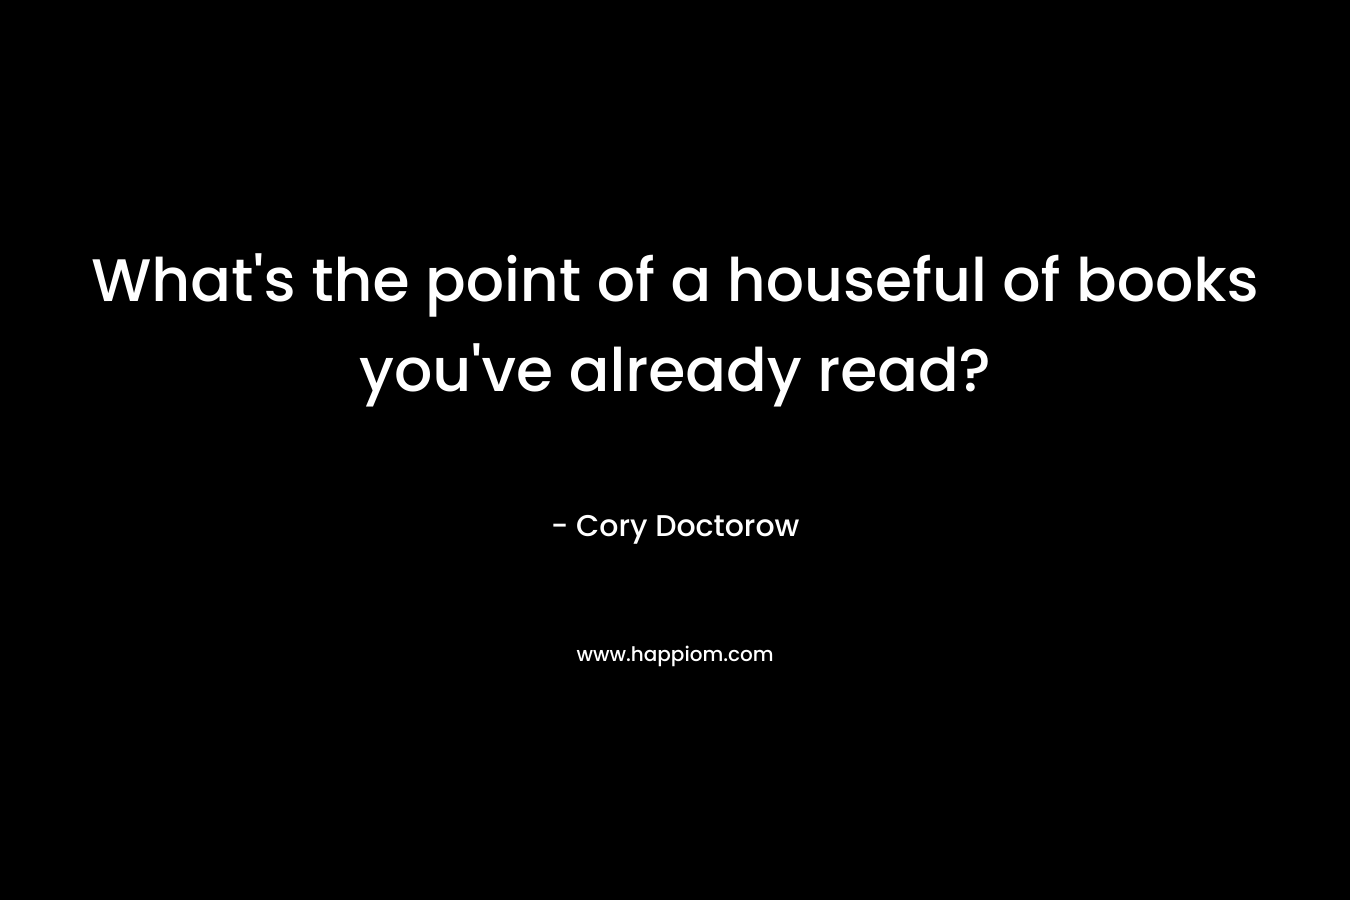 What’s the point of a houseful of books you’ve already read? – Cory Doctorow